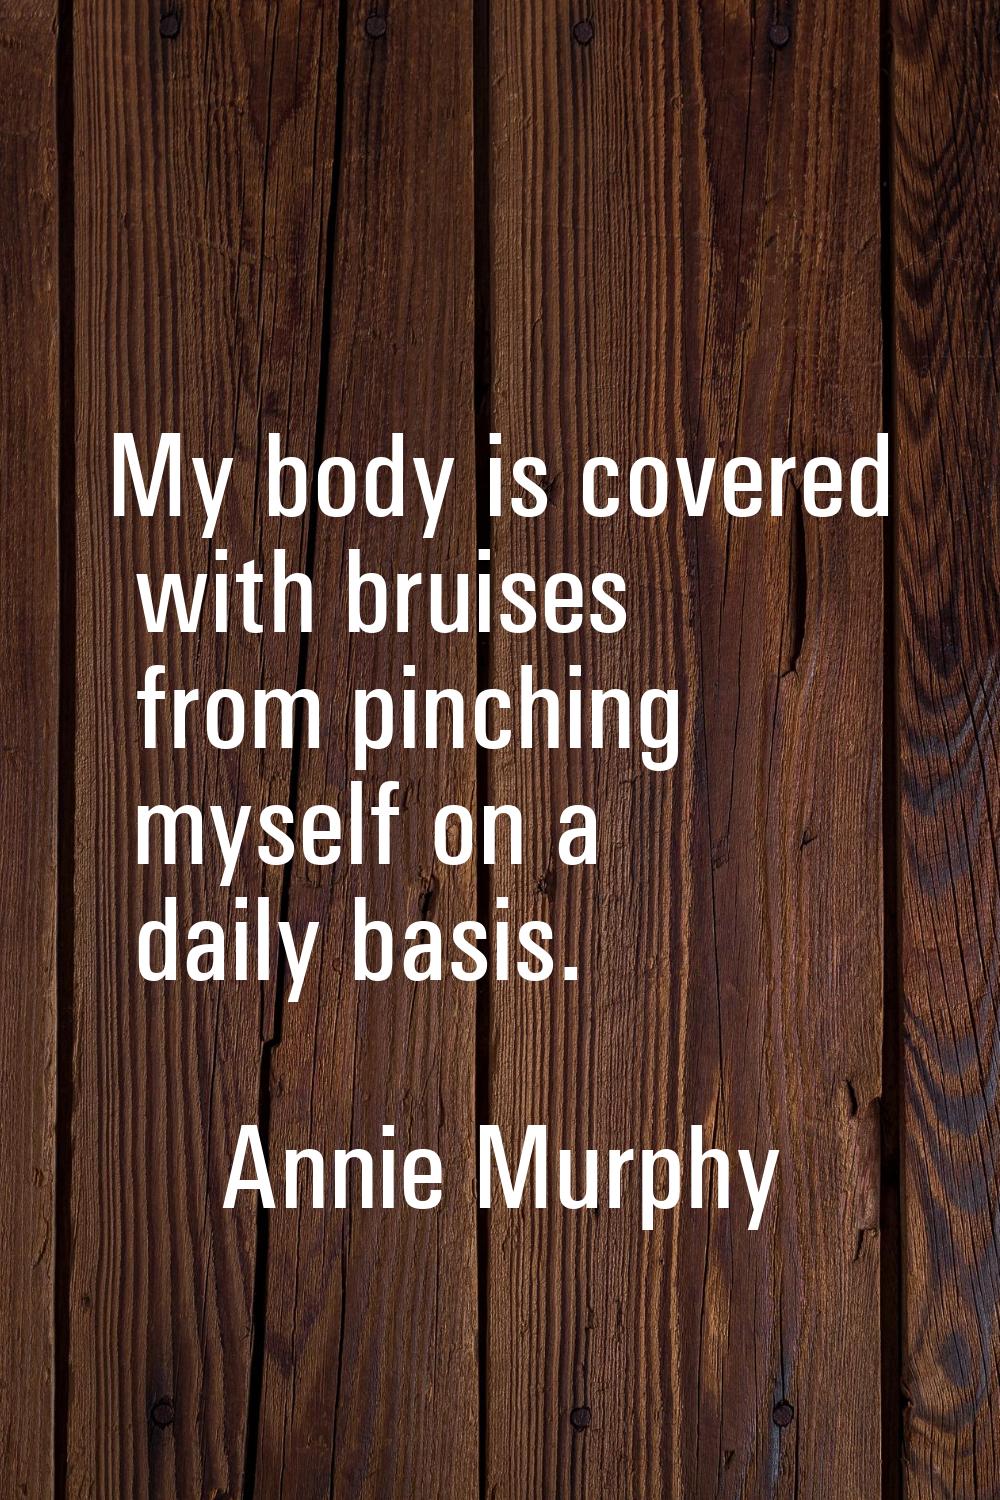 My body is covered with bruises from pinching myself on a daily basis.